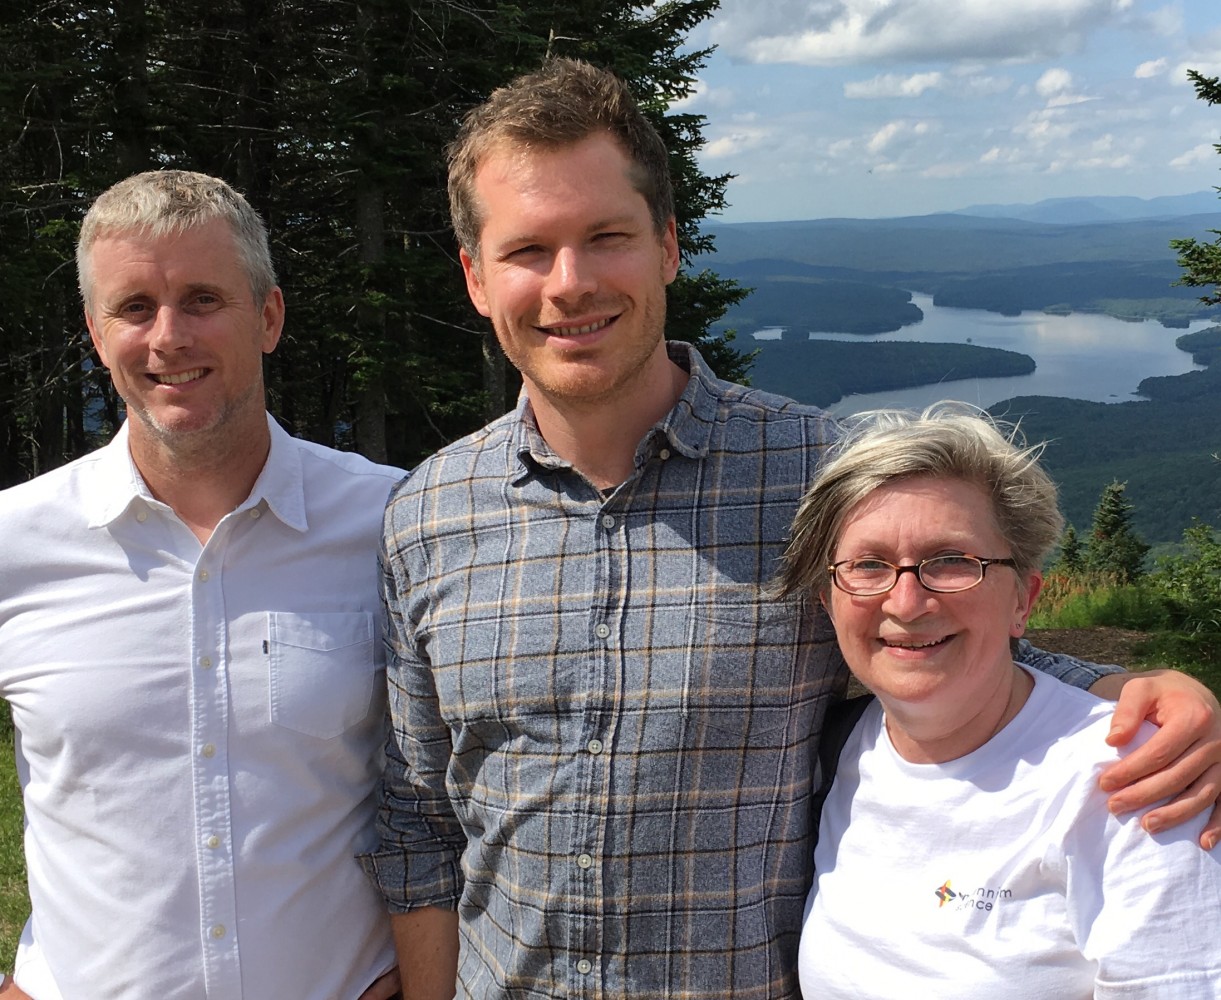 Professor Nick Barker (Singapore) and Dr Dusty Flanagan (now at the Beatson, Glasgow, UK) at the summit of Mount Snow, Vermont, USA.